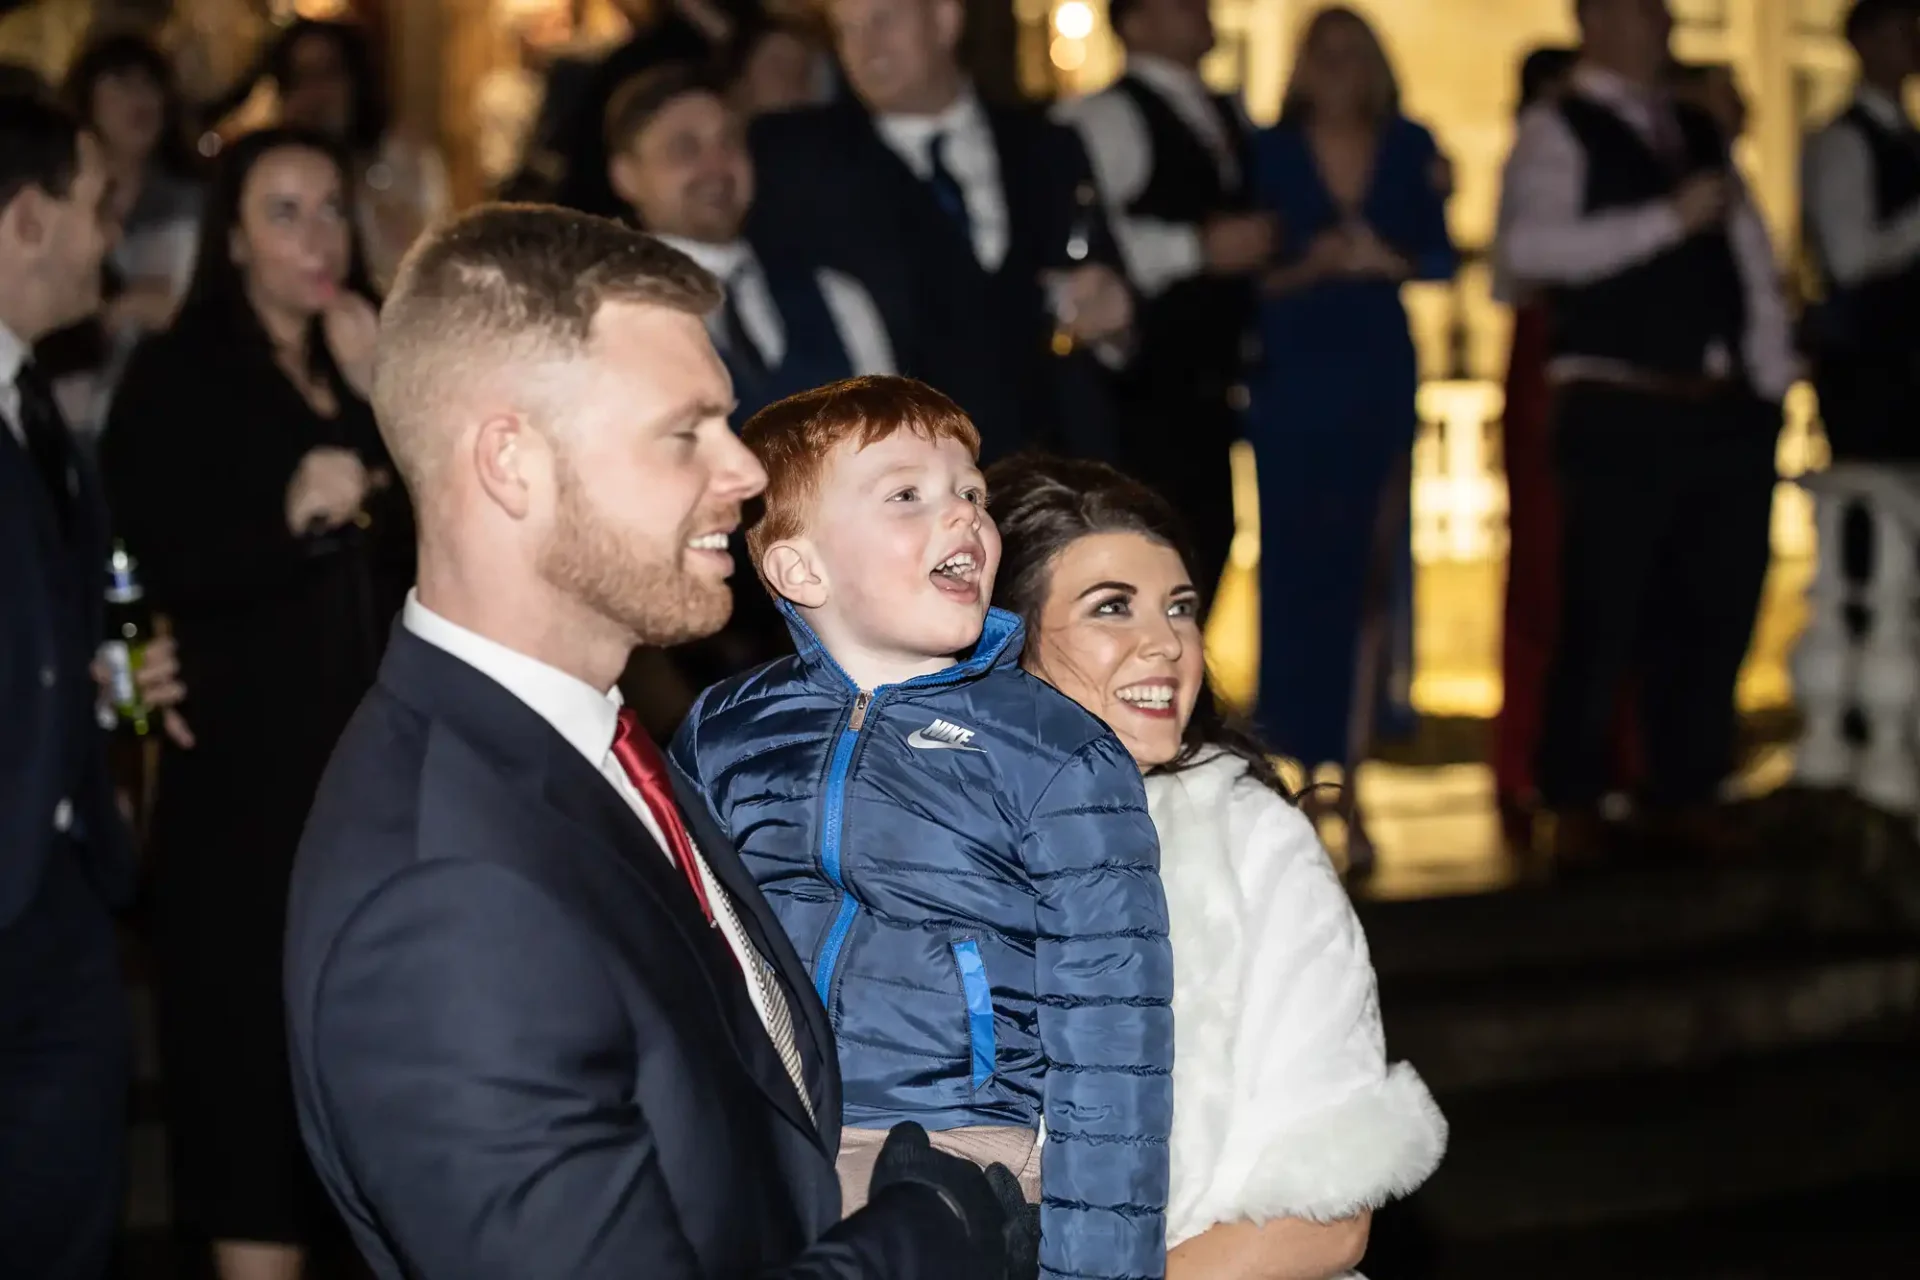 A joyful family moment at a nighttime event, featuring a man and a woman smiling while holding a small boy in a blue jacket. other attendees are visible in the background.